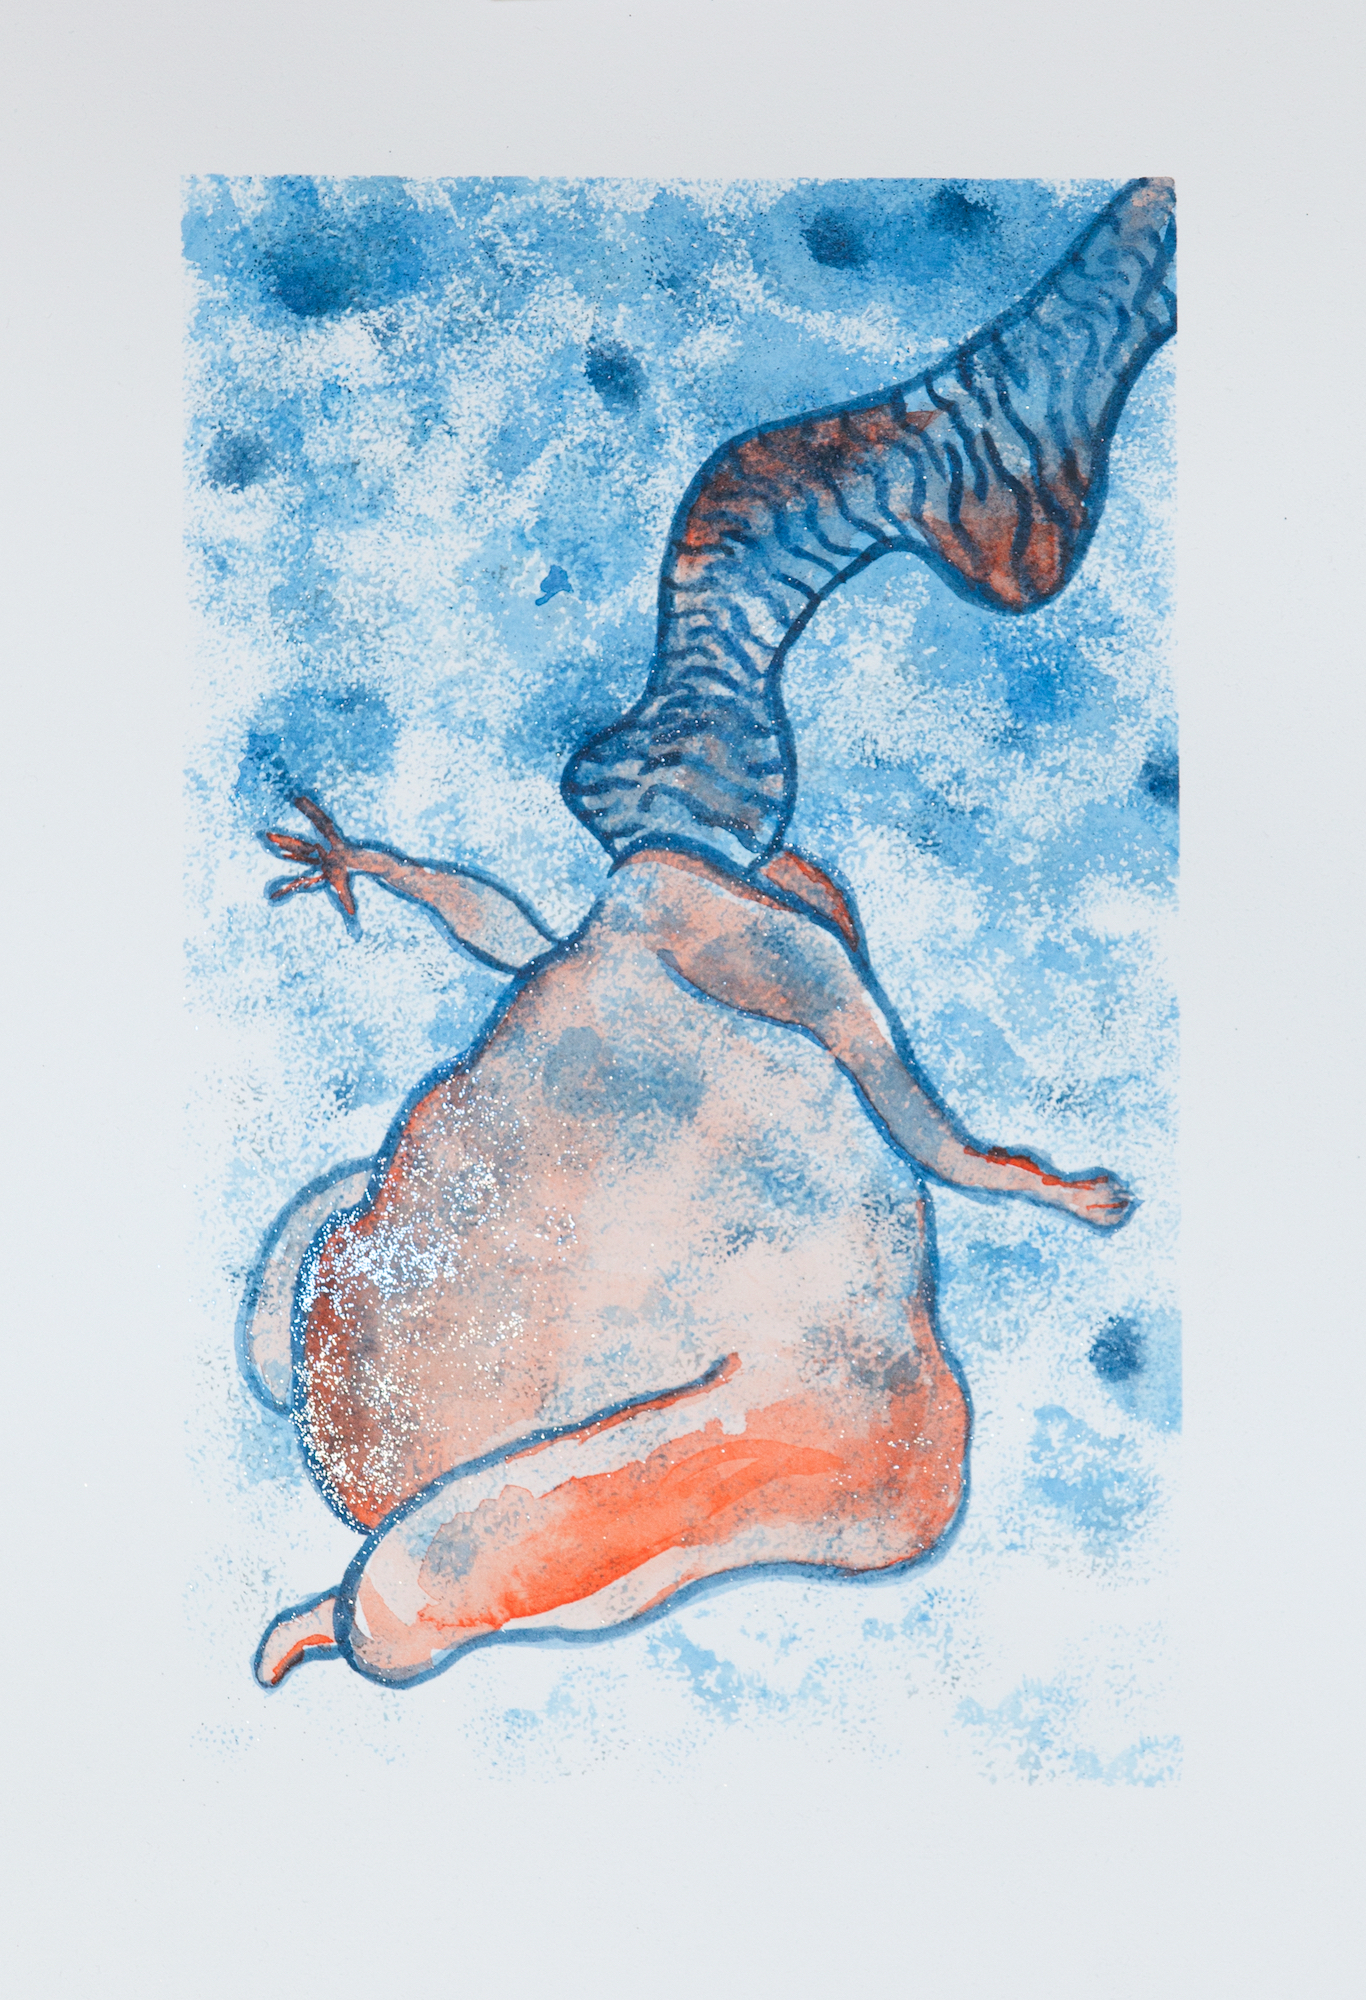 an abstracted large reddish body with long hair floats in blue background